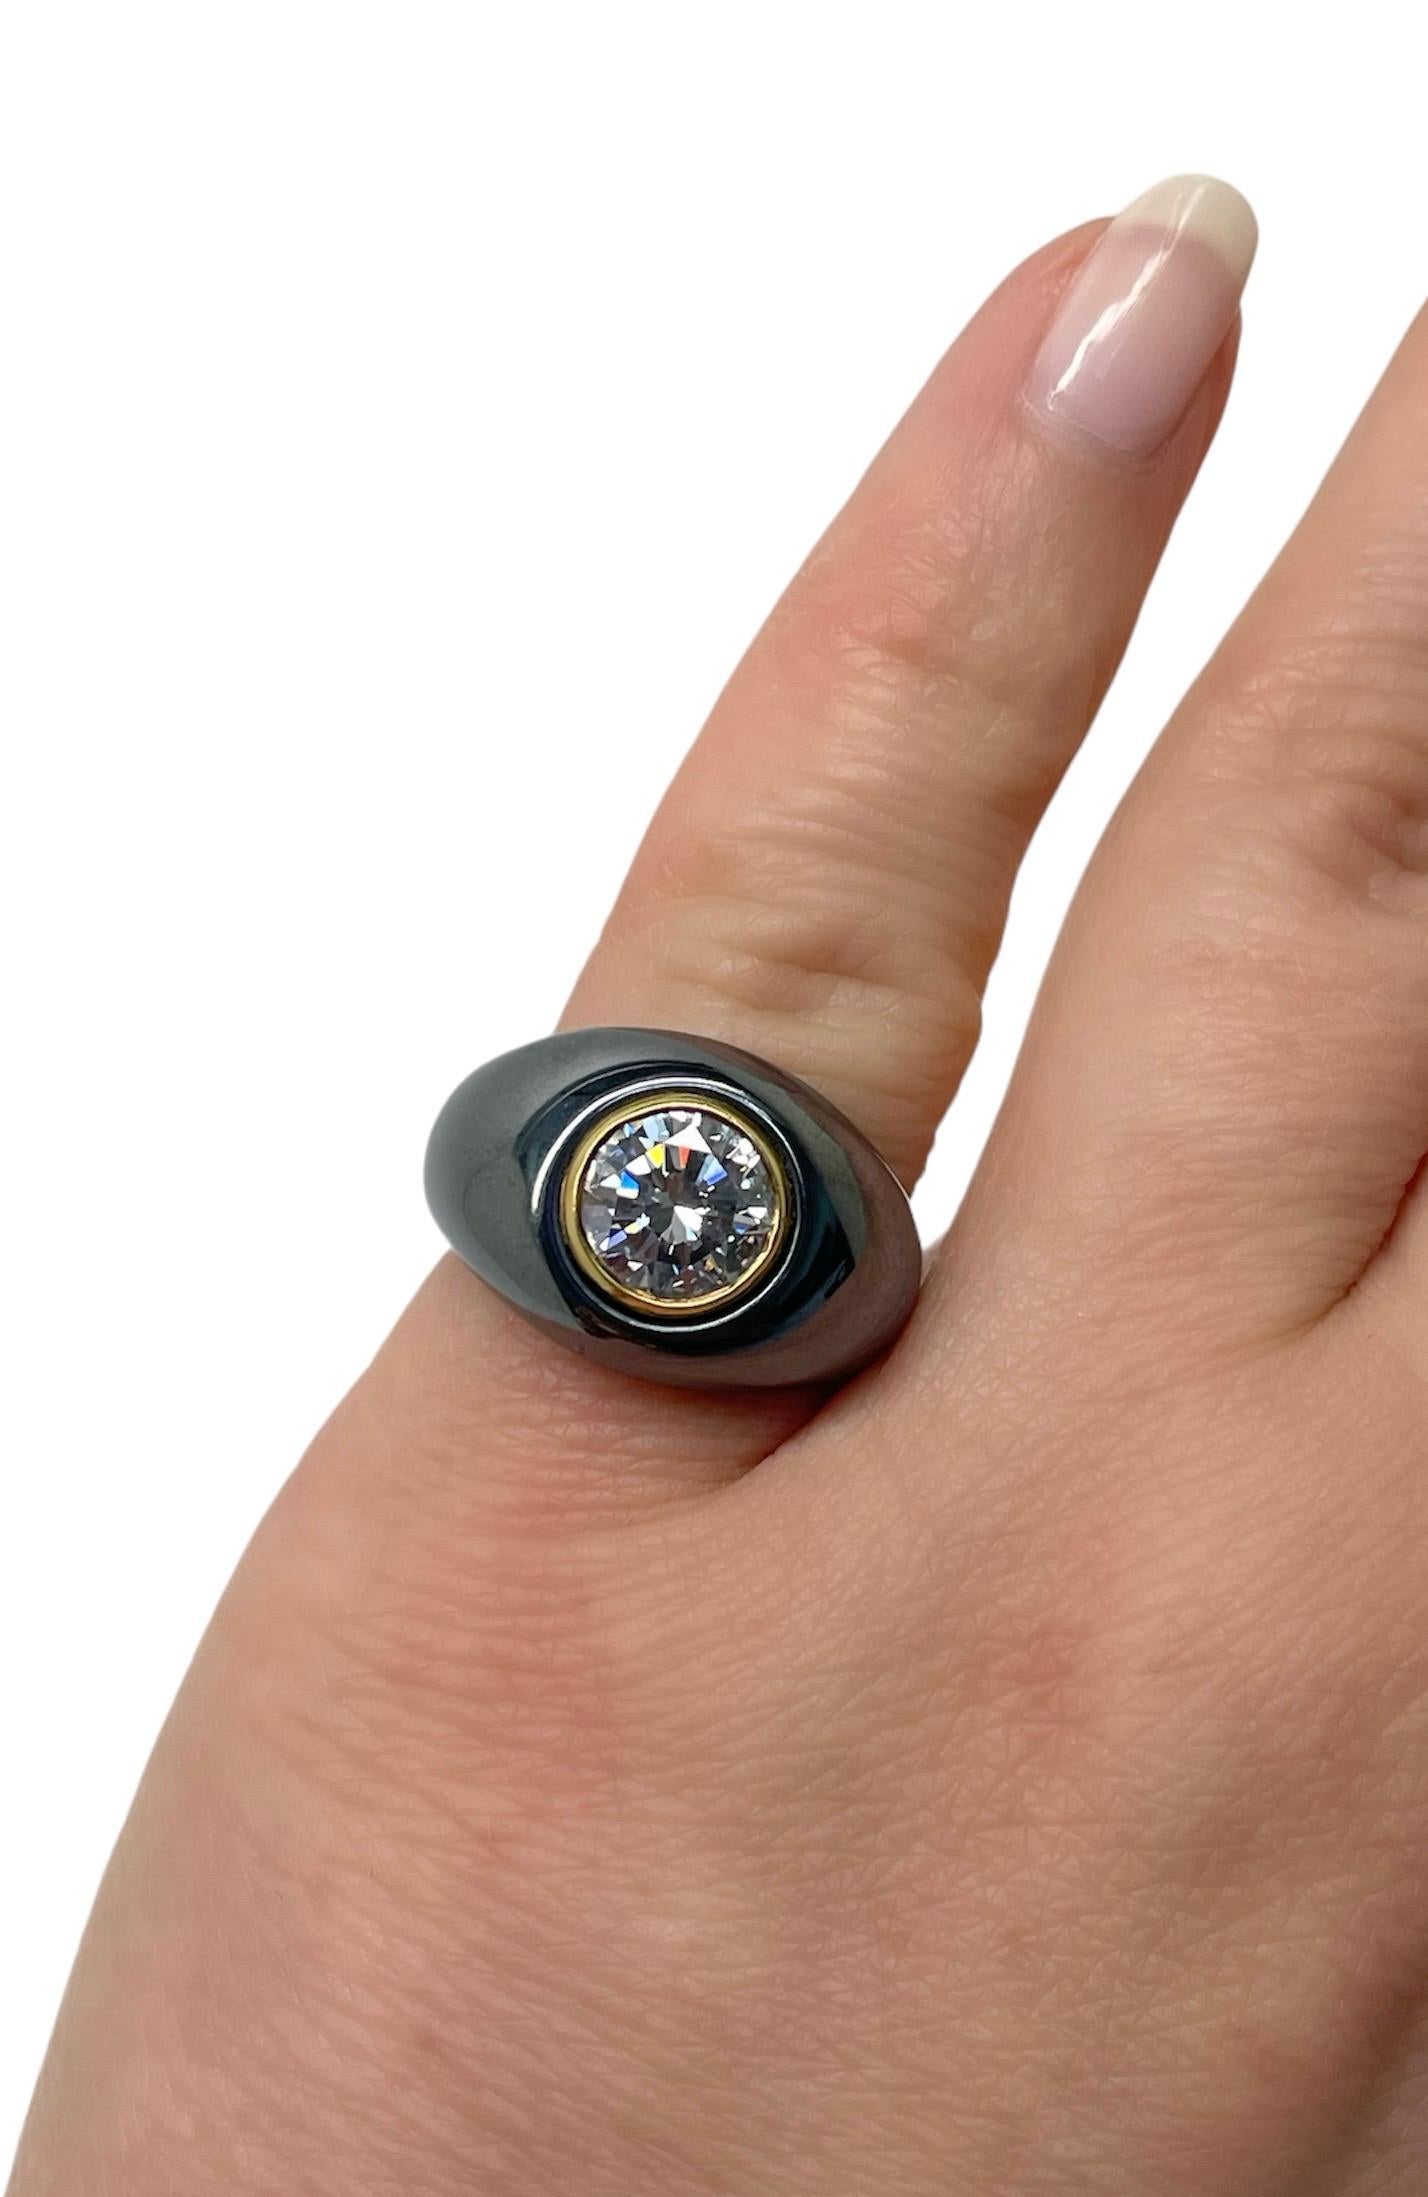 This modern and sleek Bvlgari ring contains a round brilliant cut diamond weighing 1.70 carats in a yellow gold bezel and surrounded by a carved and polished hematite plaque. Mounted in 18 karat yellow gold and skillfully crafted, this ring a